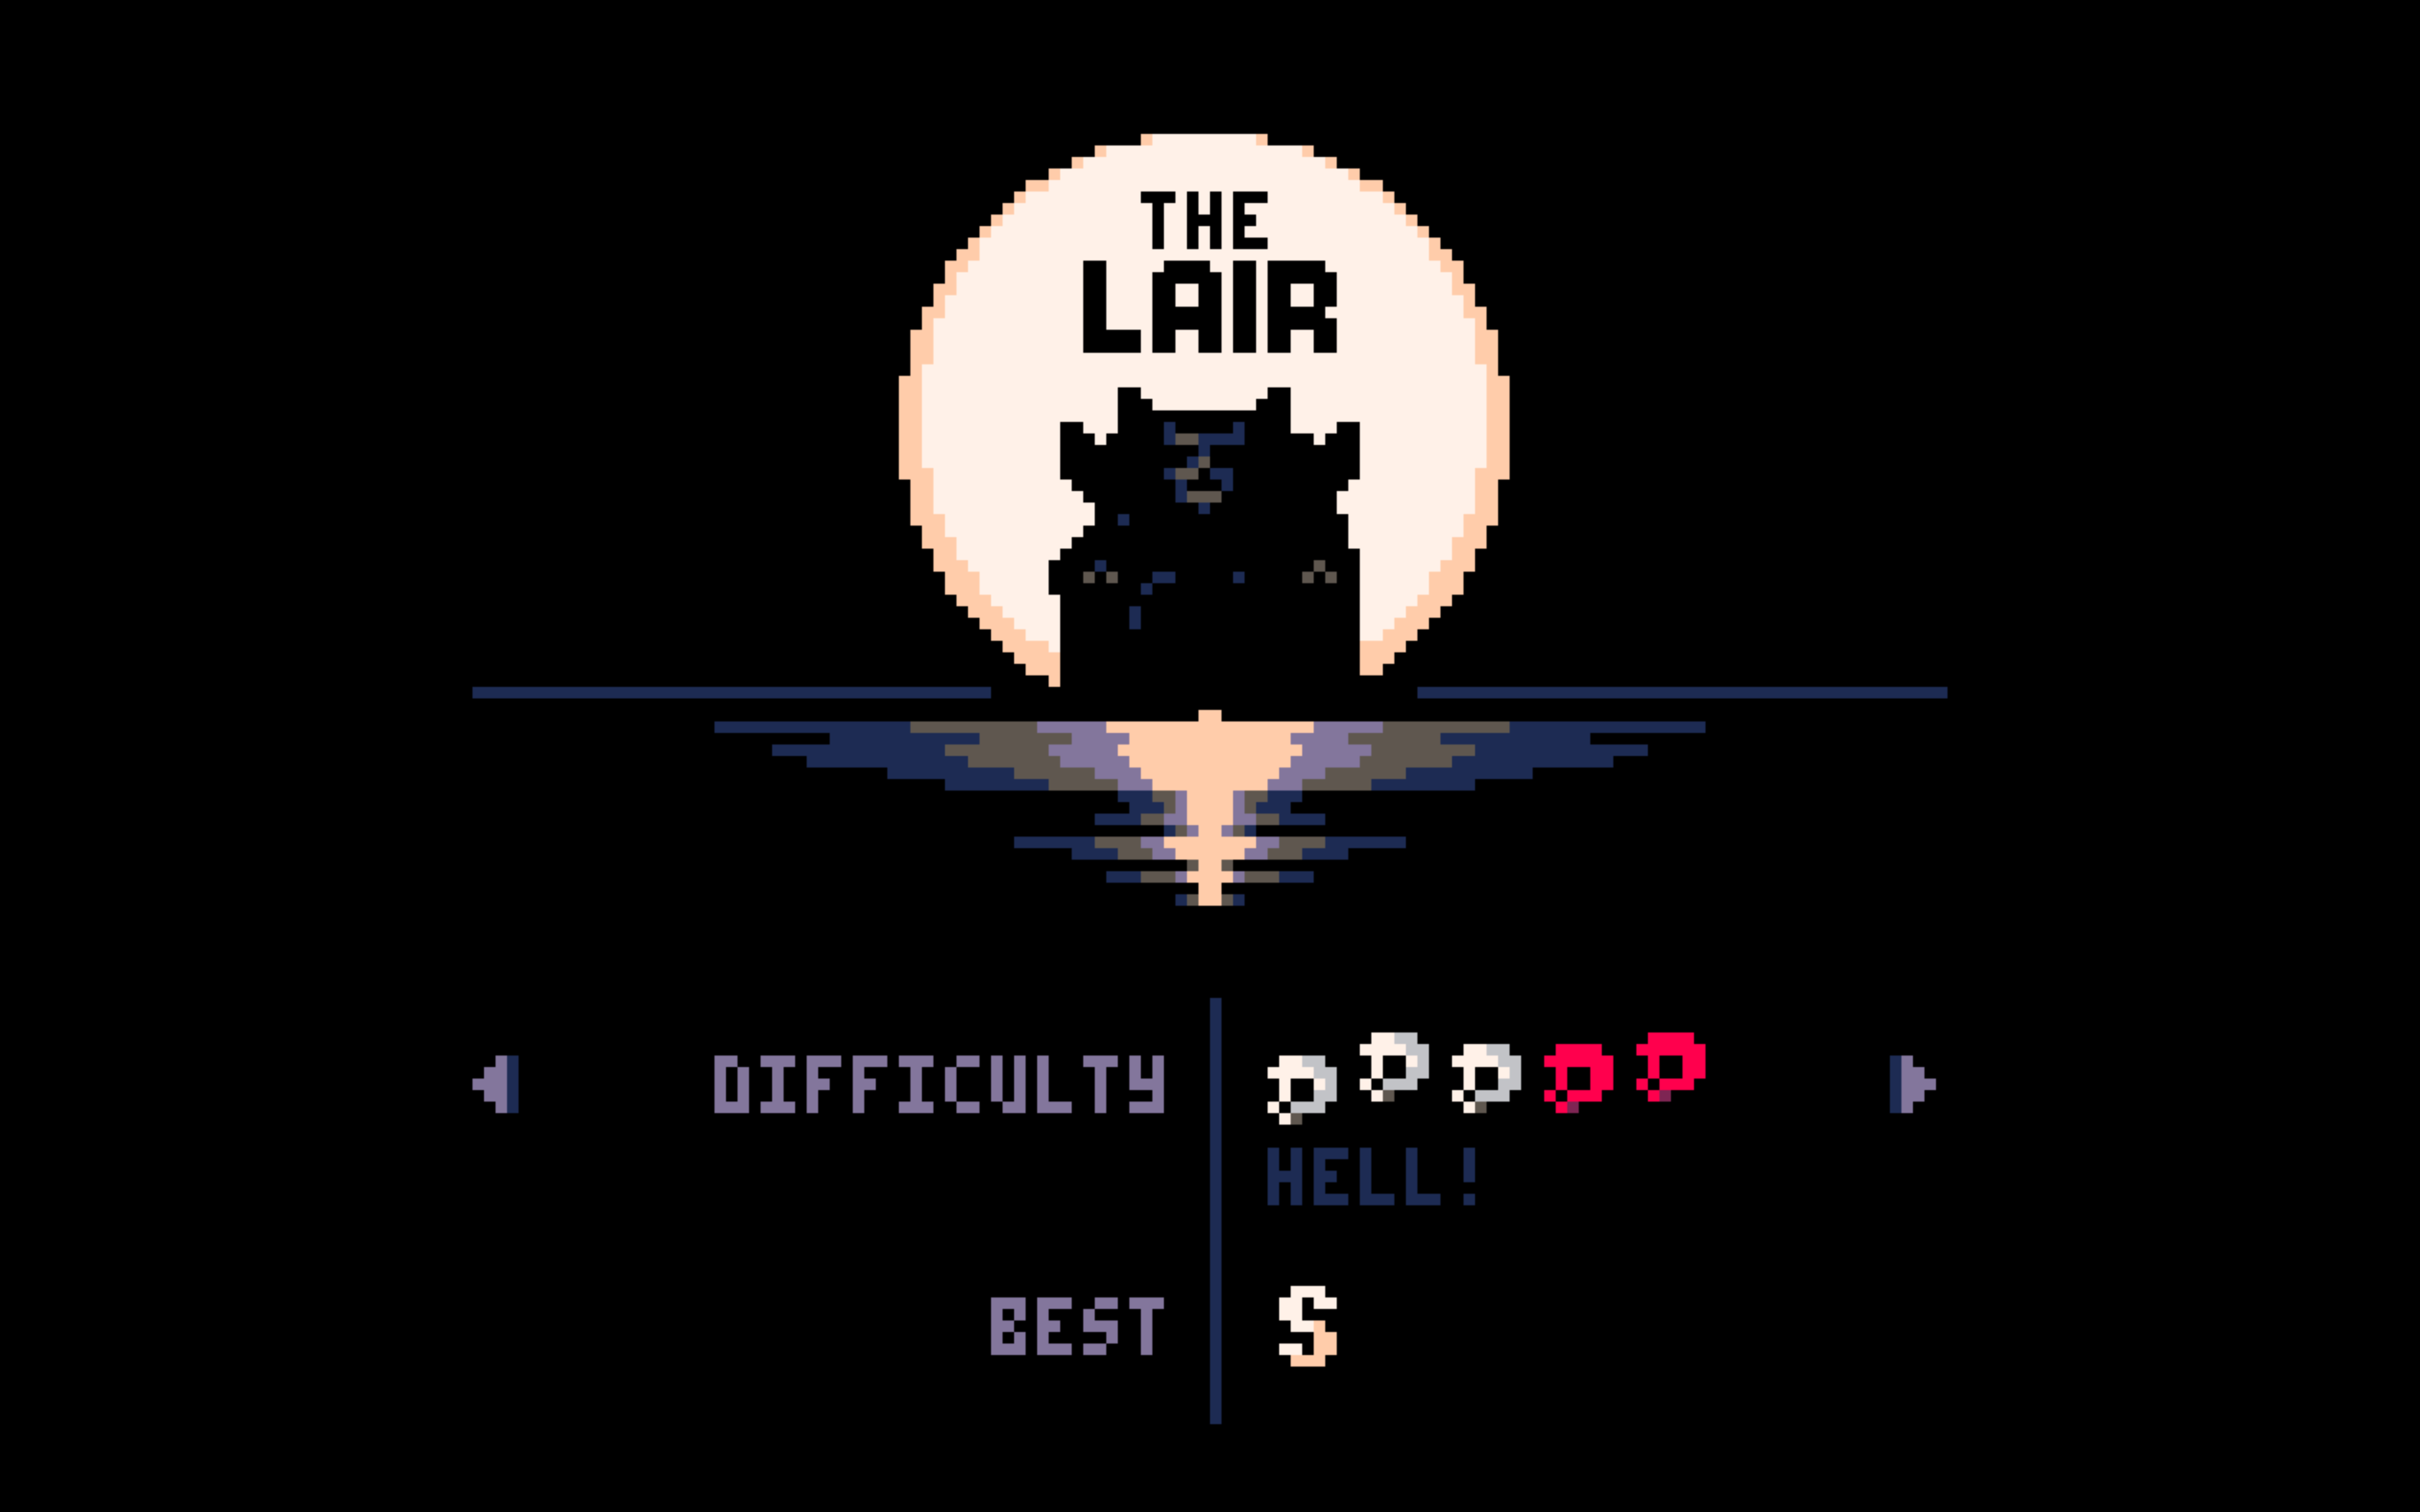 The Lair - HELL! S rank